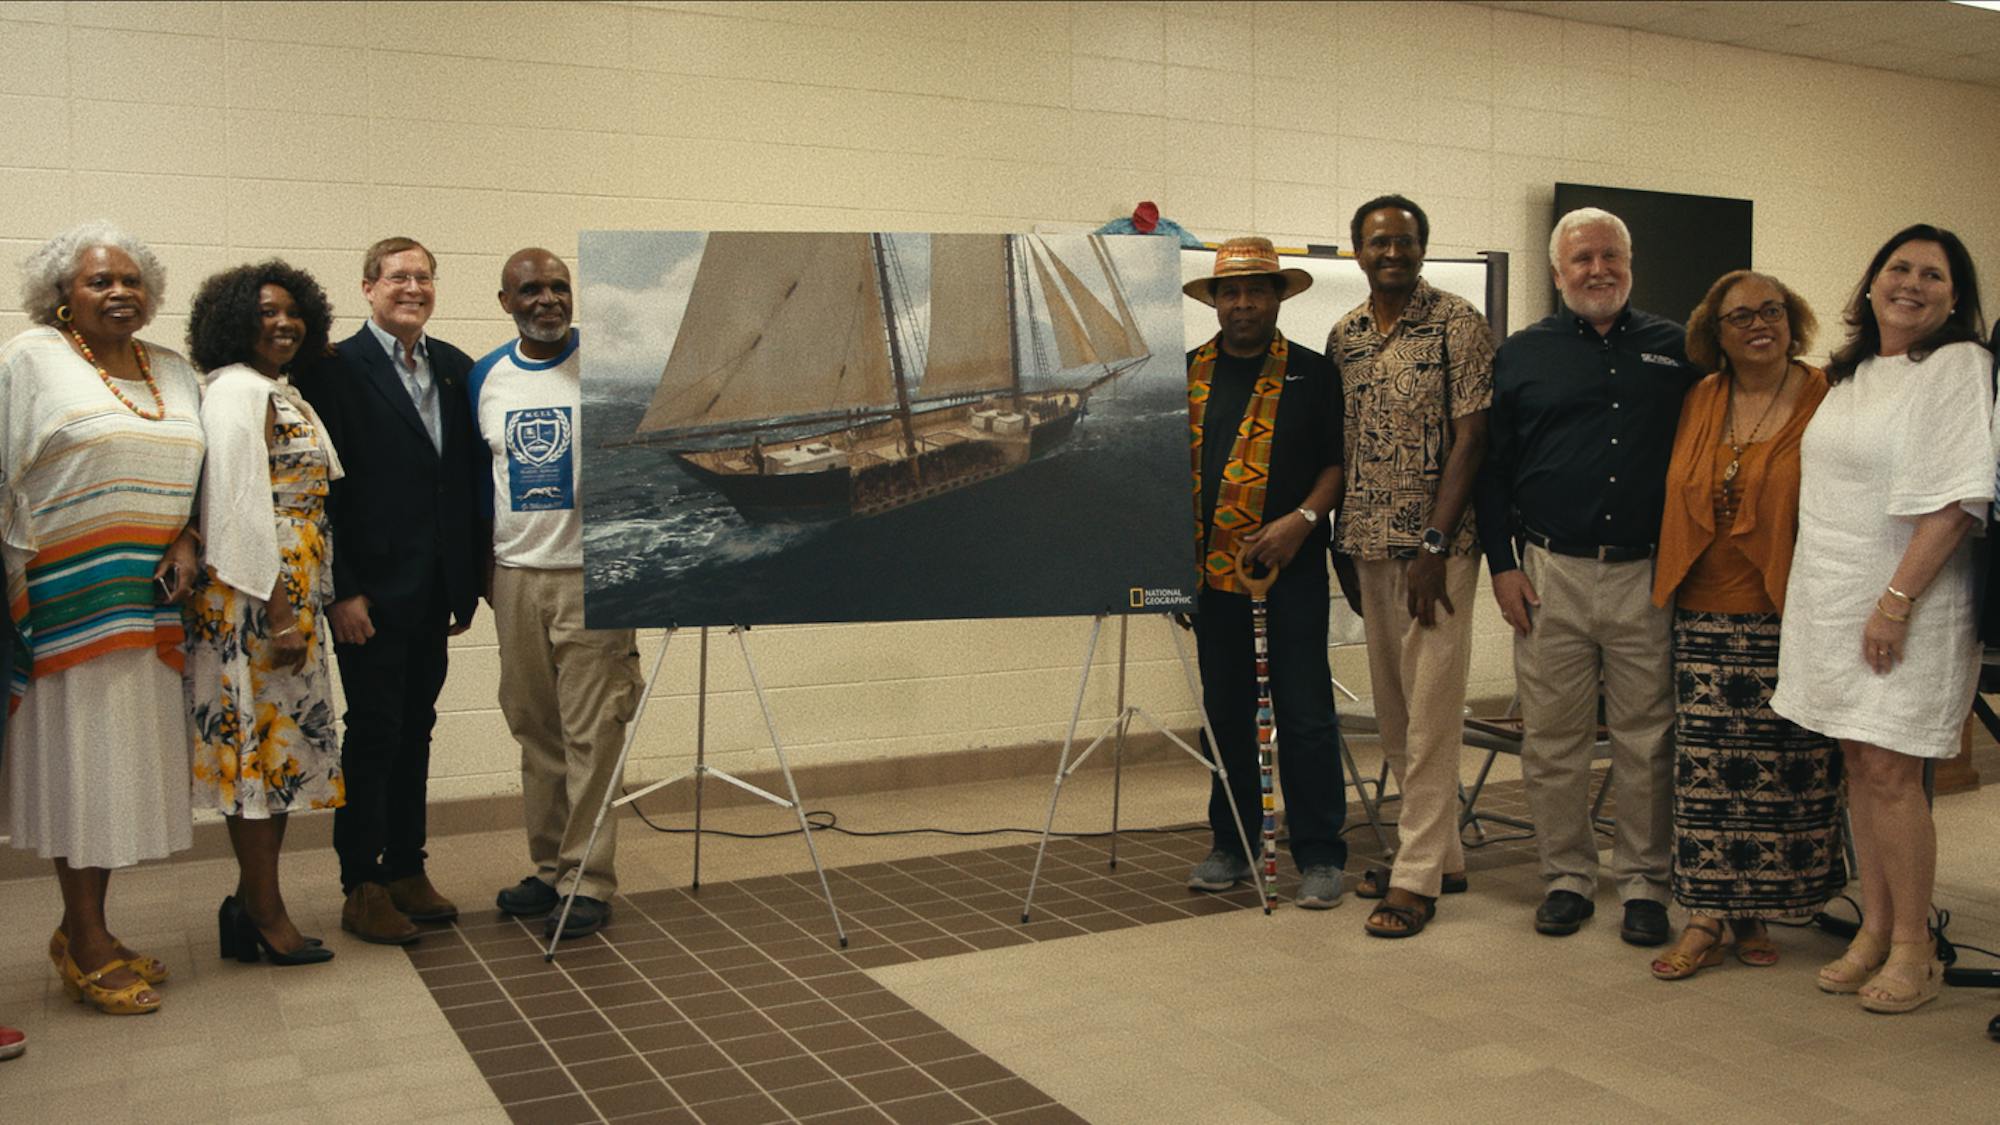 Some community members pose around a rendering of the Clotilda. They stand in a beige room facing the camera.